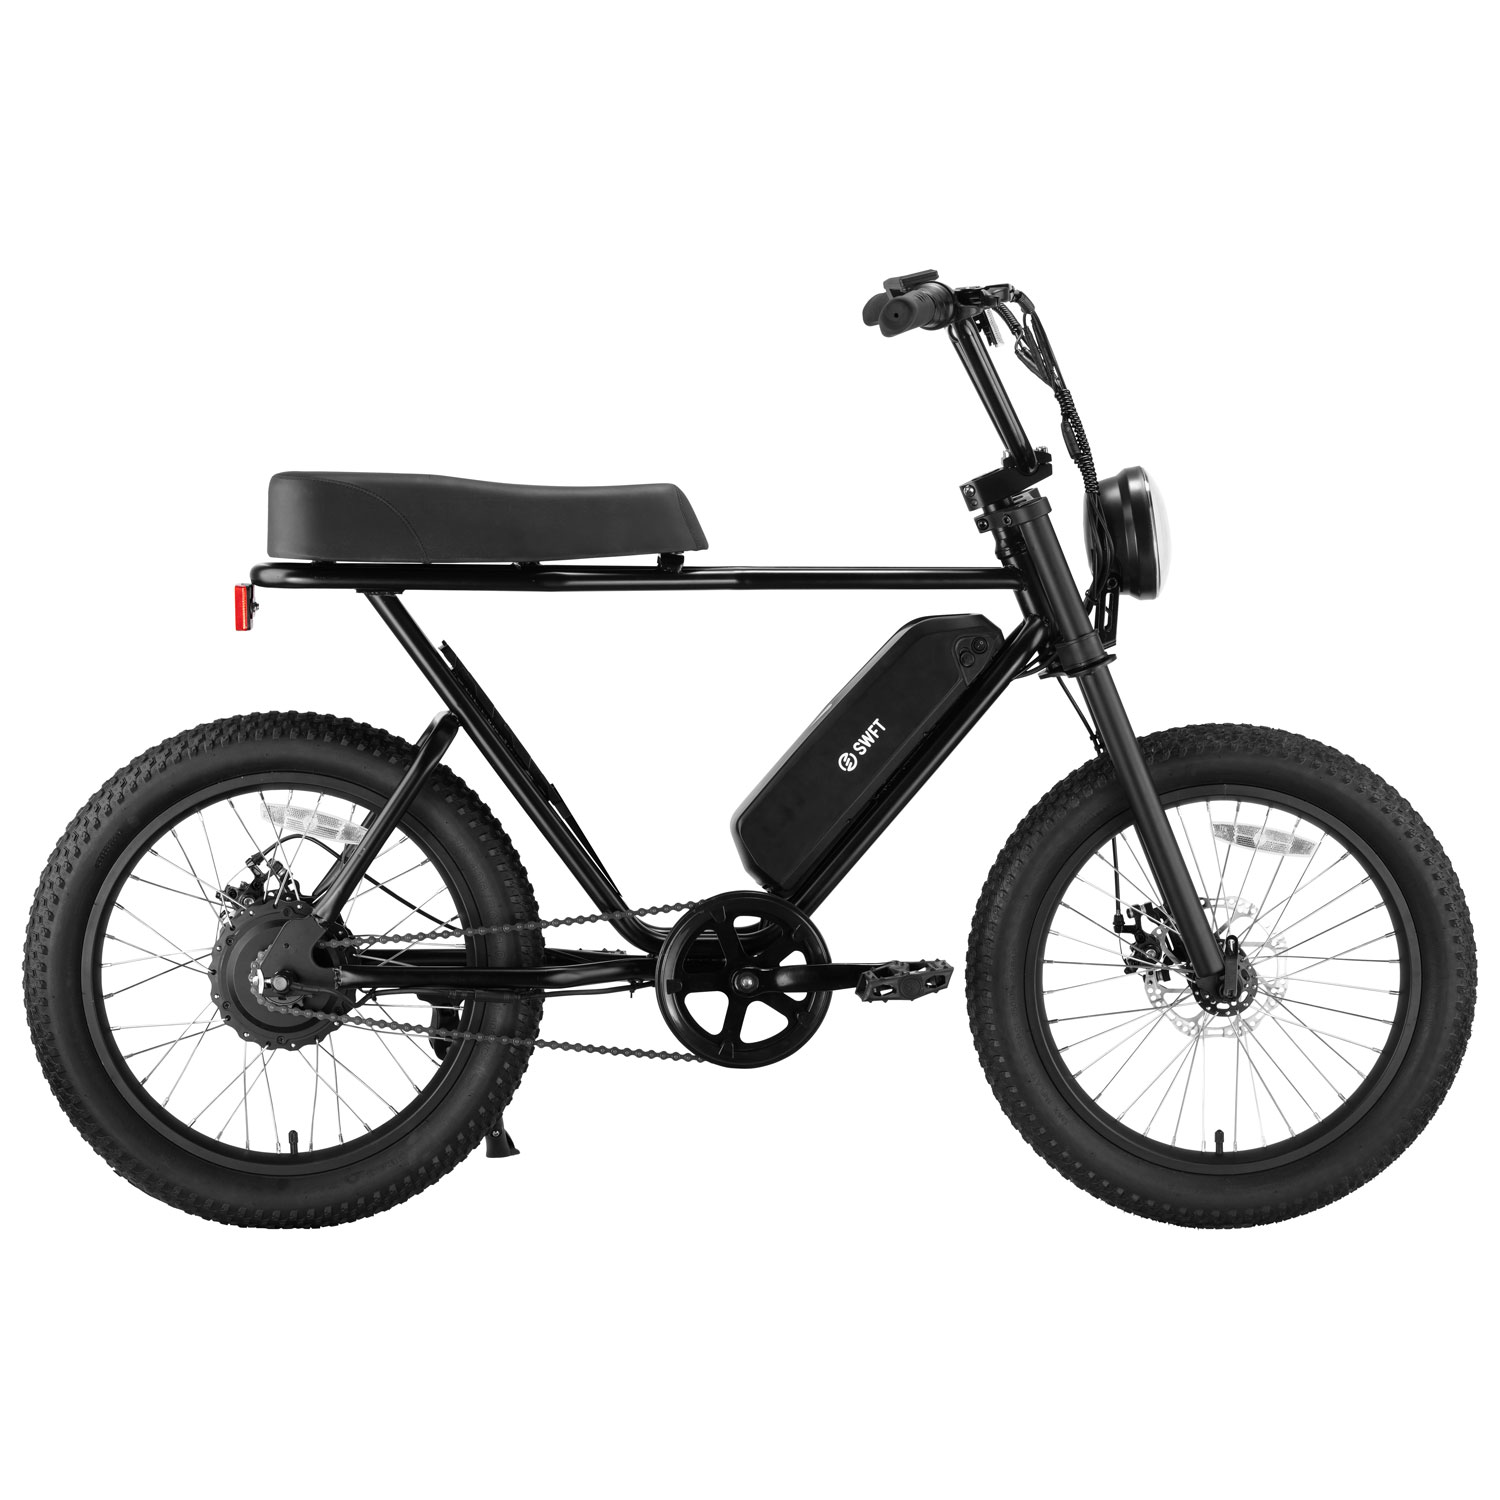 SWFT Zip X 500W Electric Fat Tire Motorcycle-Style Bike with up to 59.5km Battery Life - Black